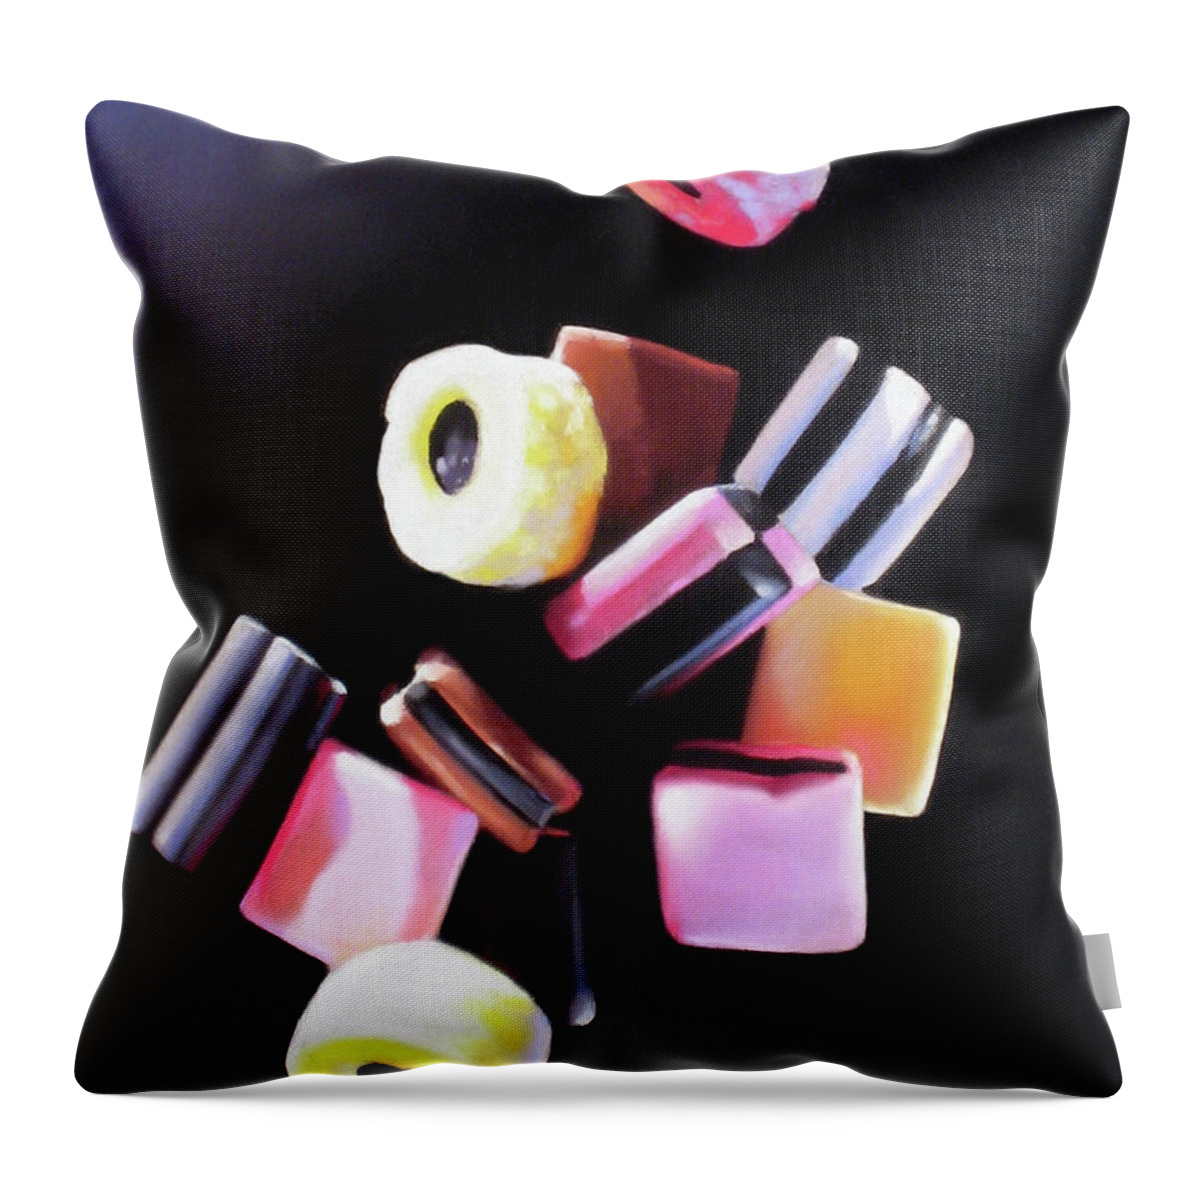 Licorice Allsorts Throw Pillow featuring the pastel Y'all Fall Down by Dianna Ponting